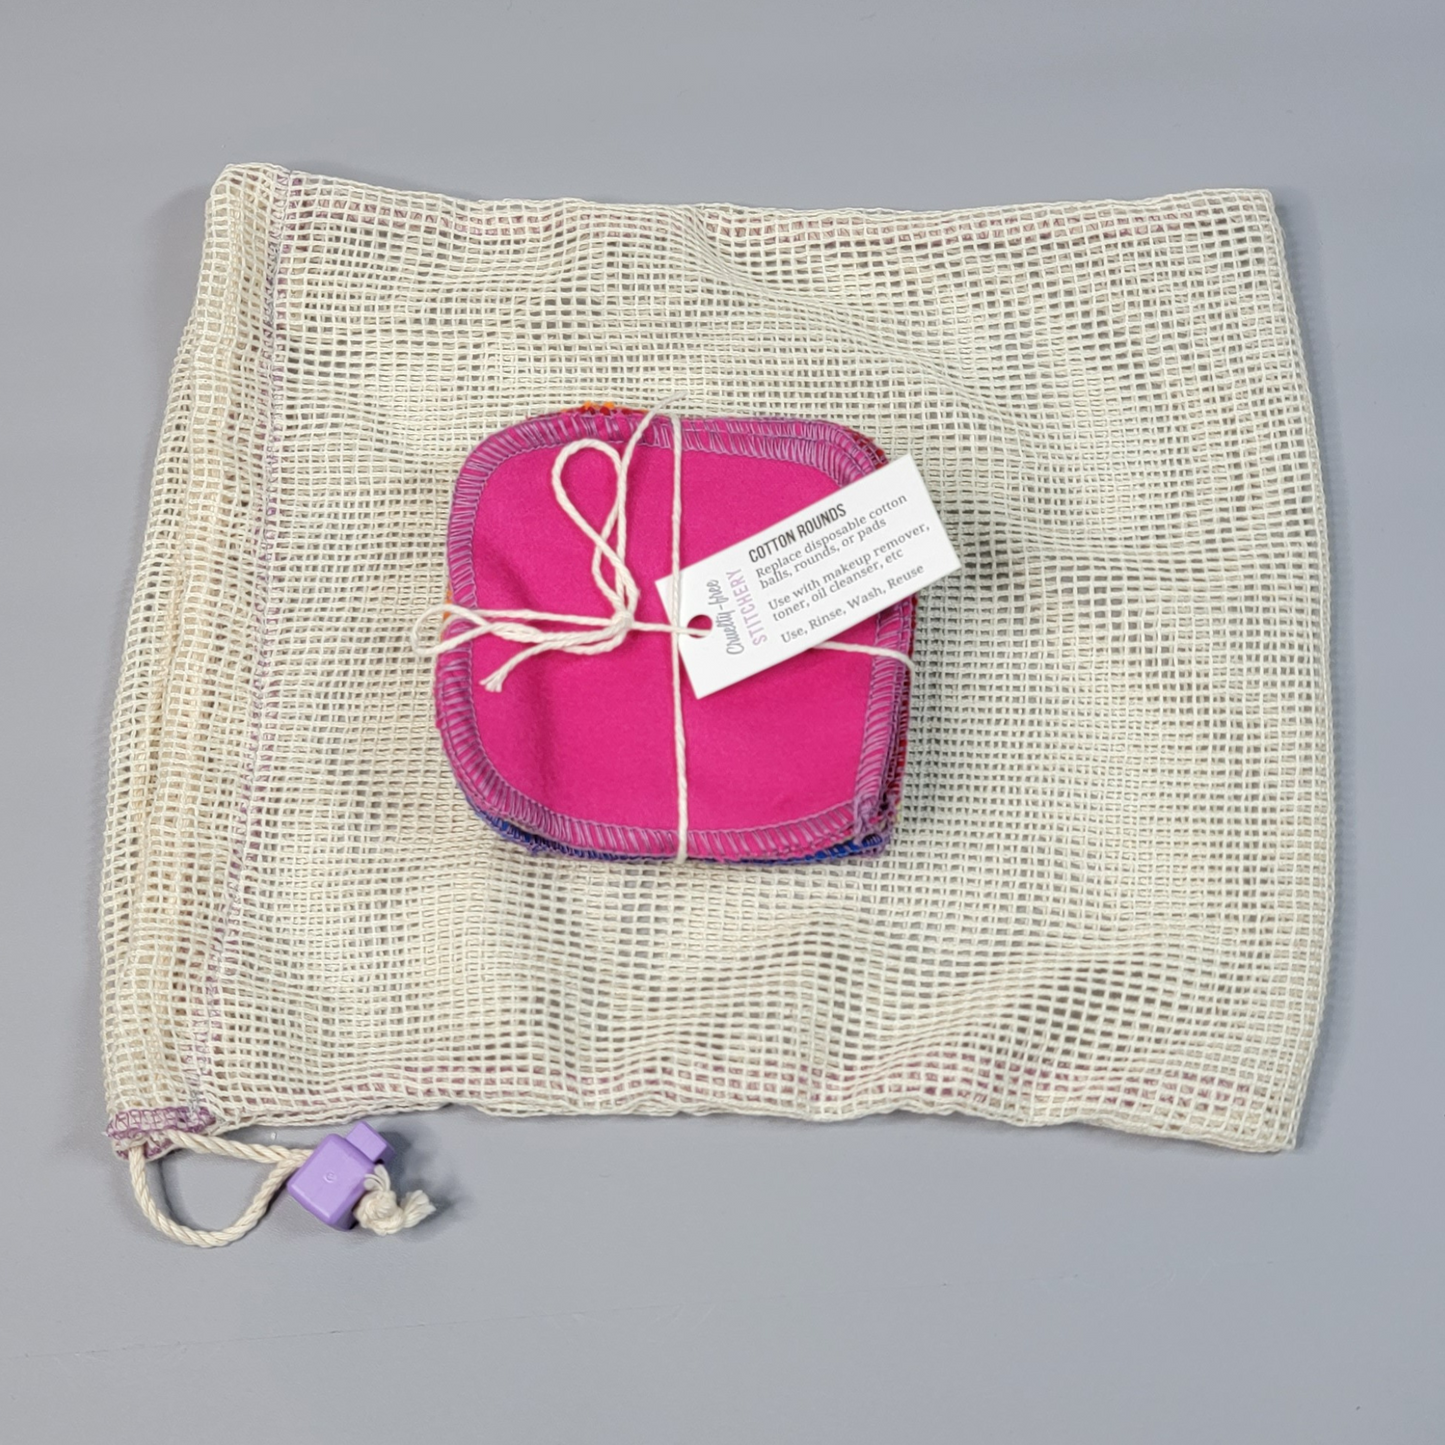 Bundled pack of cotton rounds on top of a mesh drawstring bag. The bag is a natural off-white colored square mesh, with a light purple cord stop.